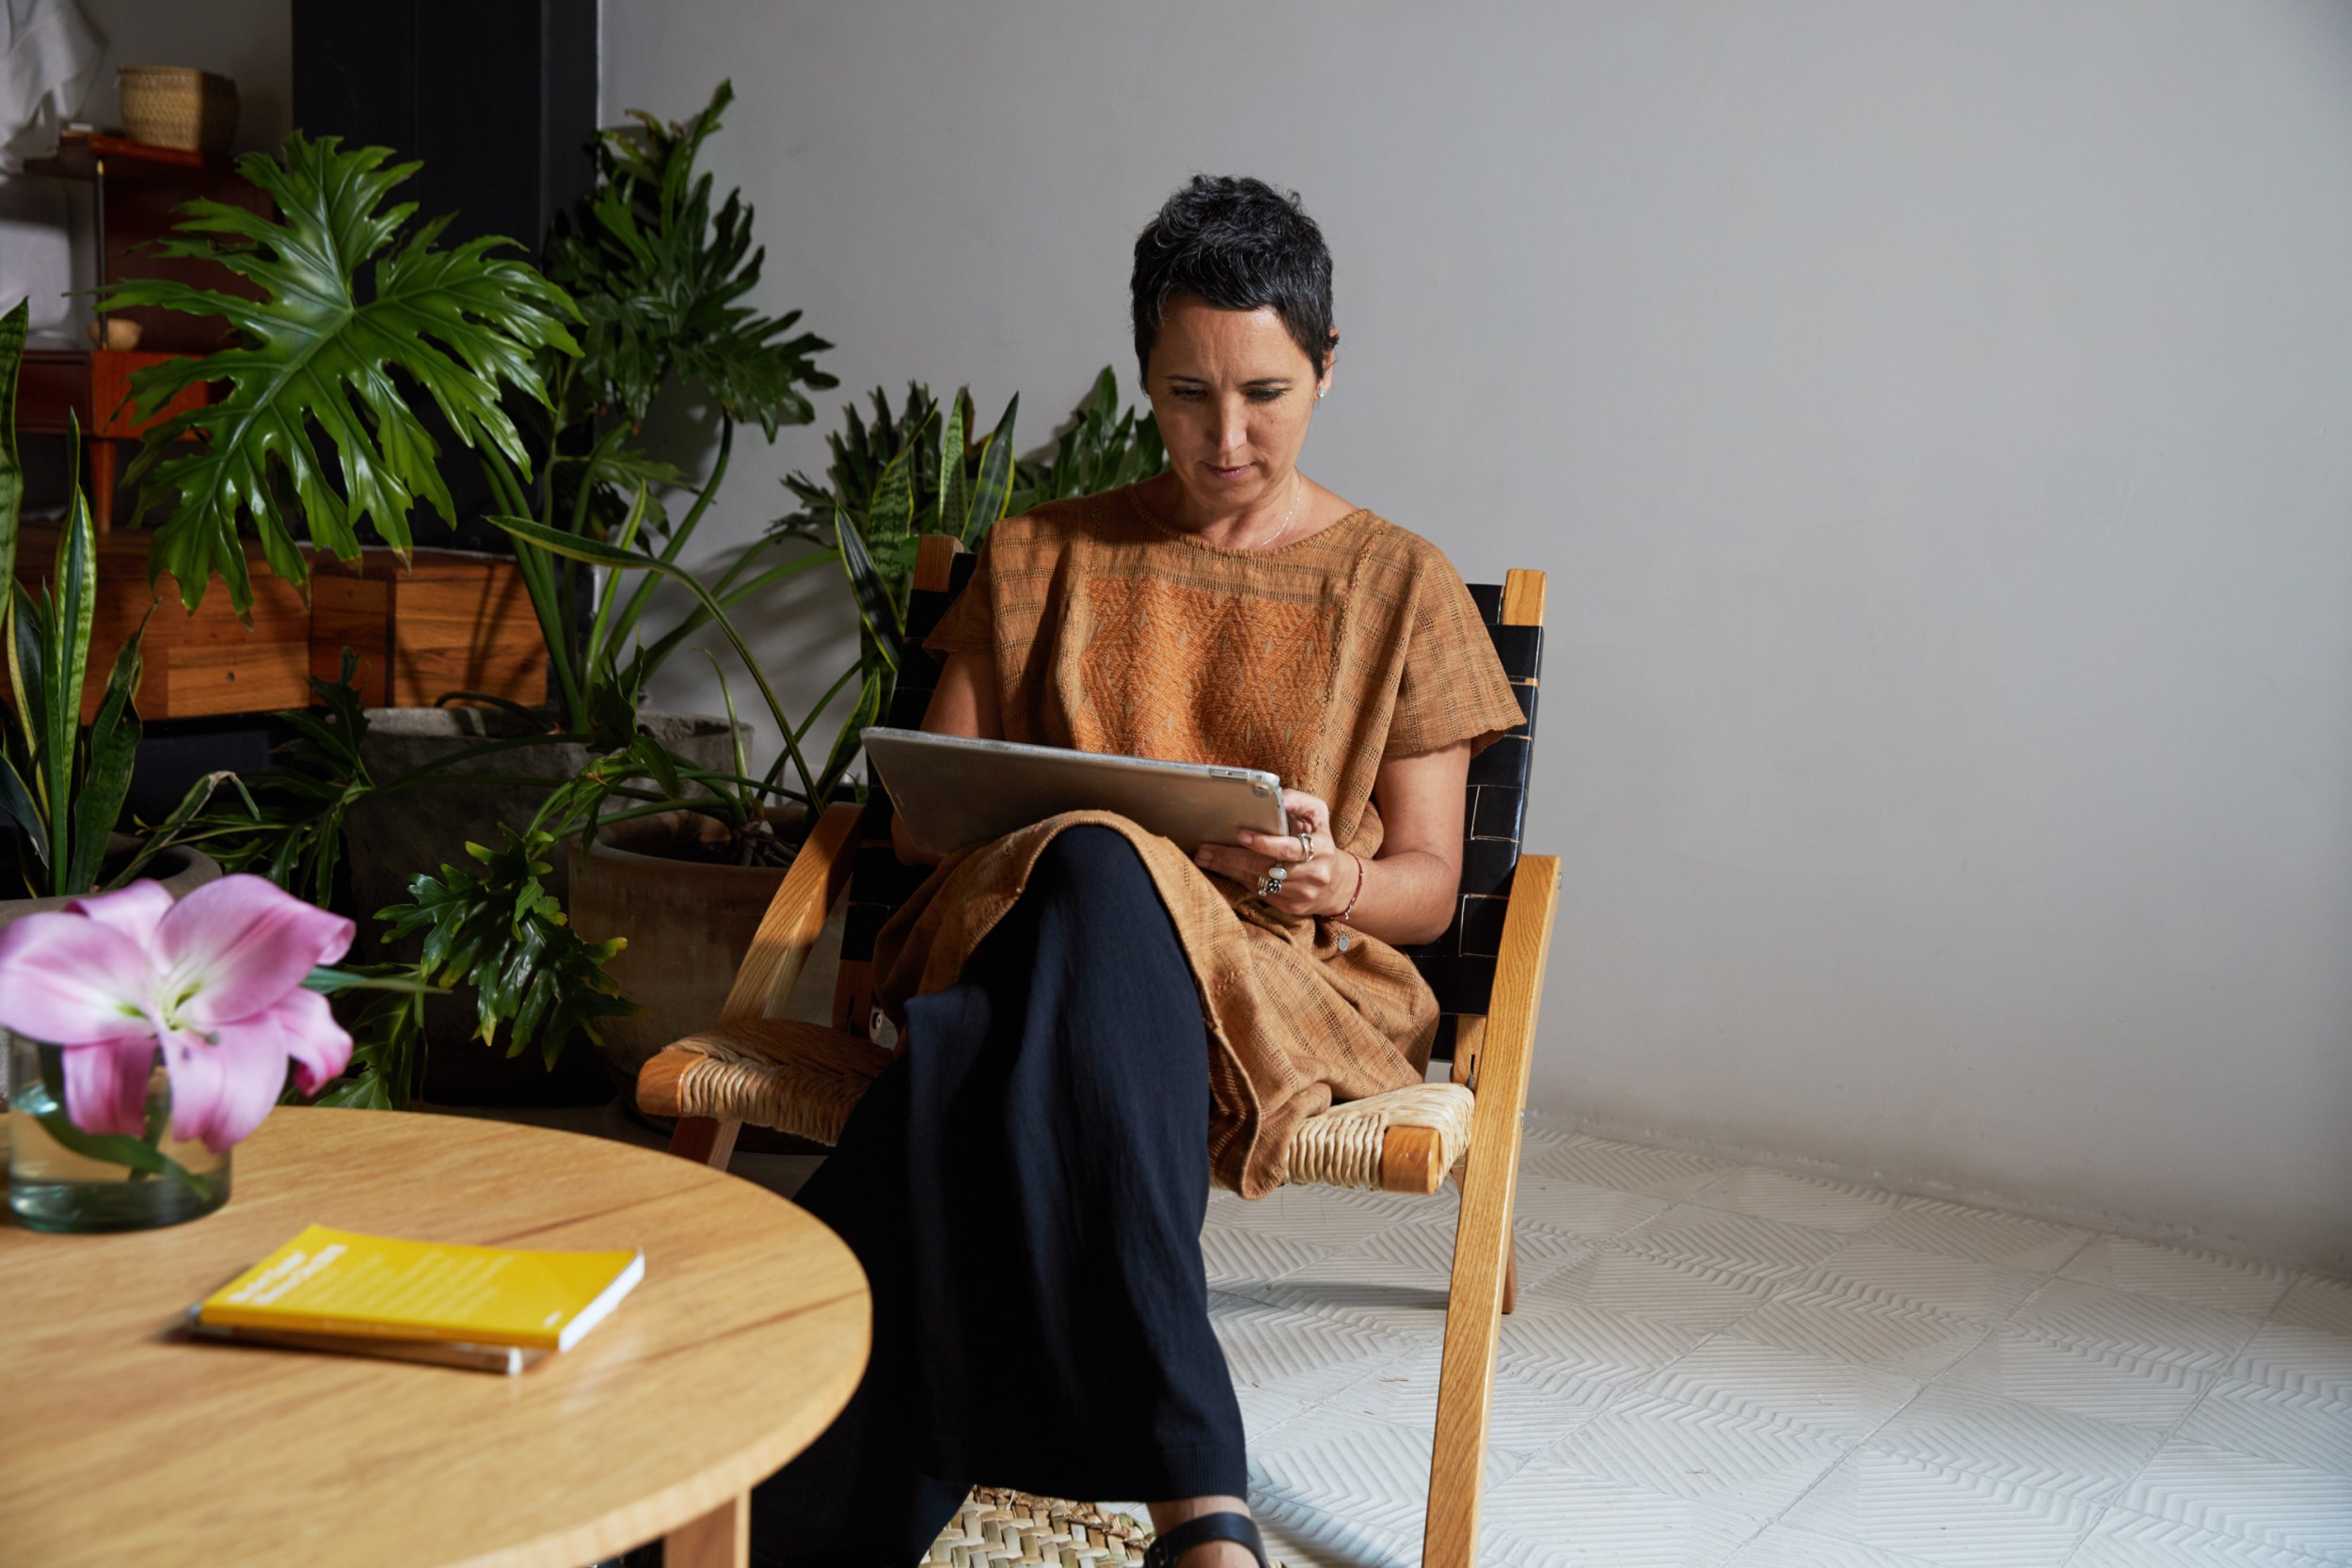 Woman sitting in a chair looking at an iPad with a plant behind her.